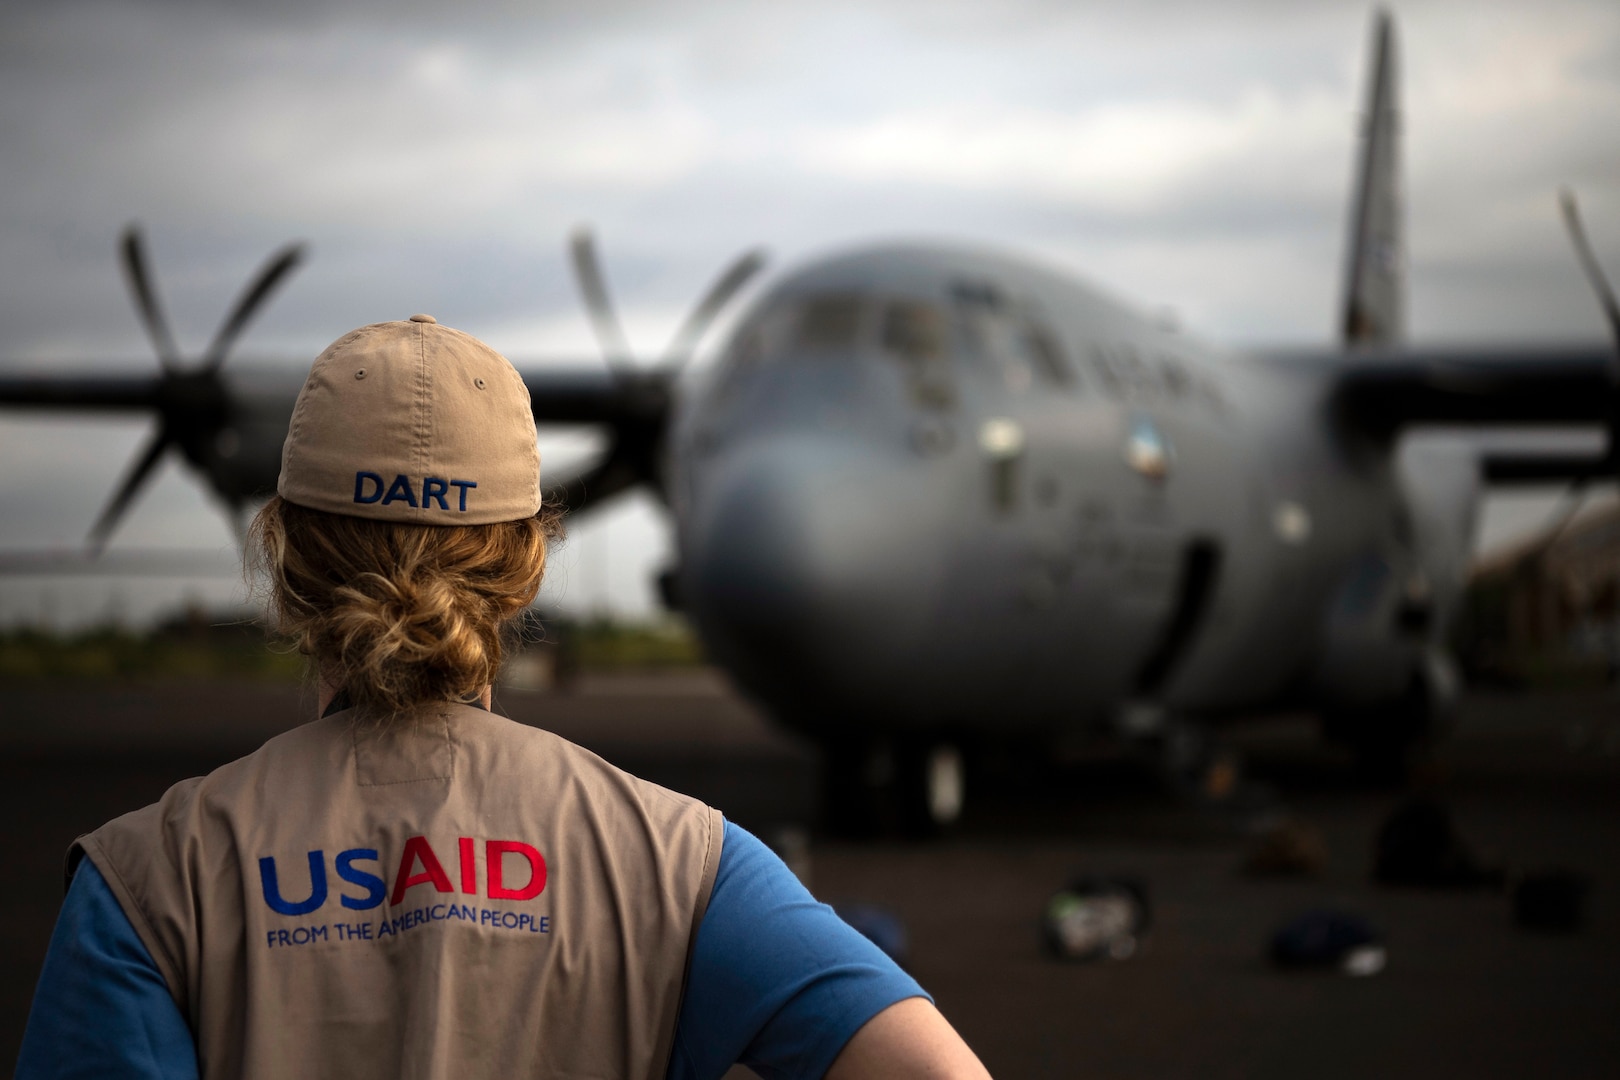 U.S. Agency for International Development worker waits for flight on C-130J Hercules assigned to 75th Expeditionary Airlift Squadron, Combined Joint
Task Force–Horn of Africa, in Maputo, Mozambique, March 29, 2019 (U.S. Air Force/Chris Hibben)